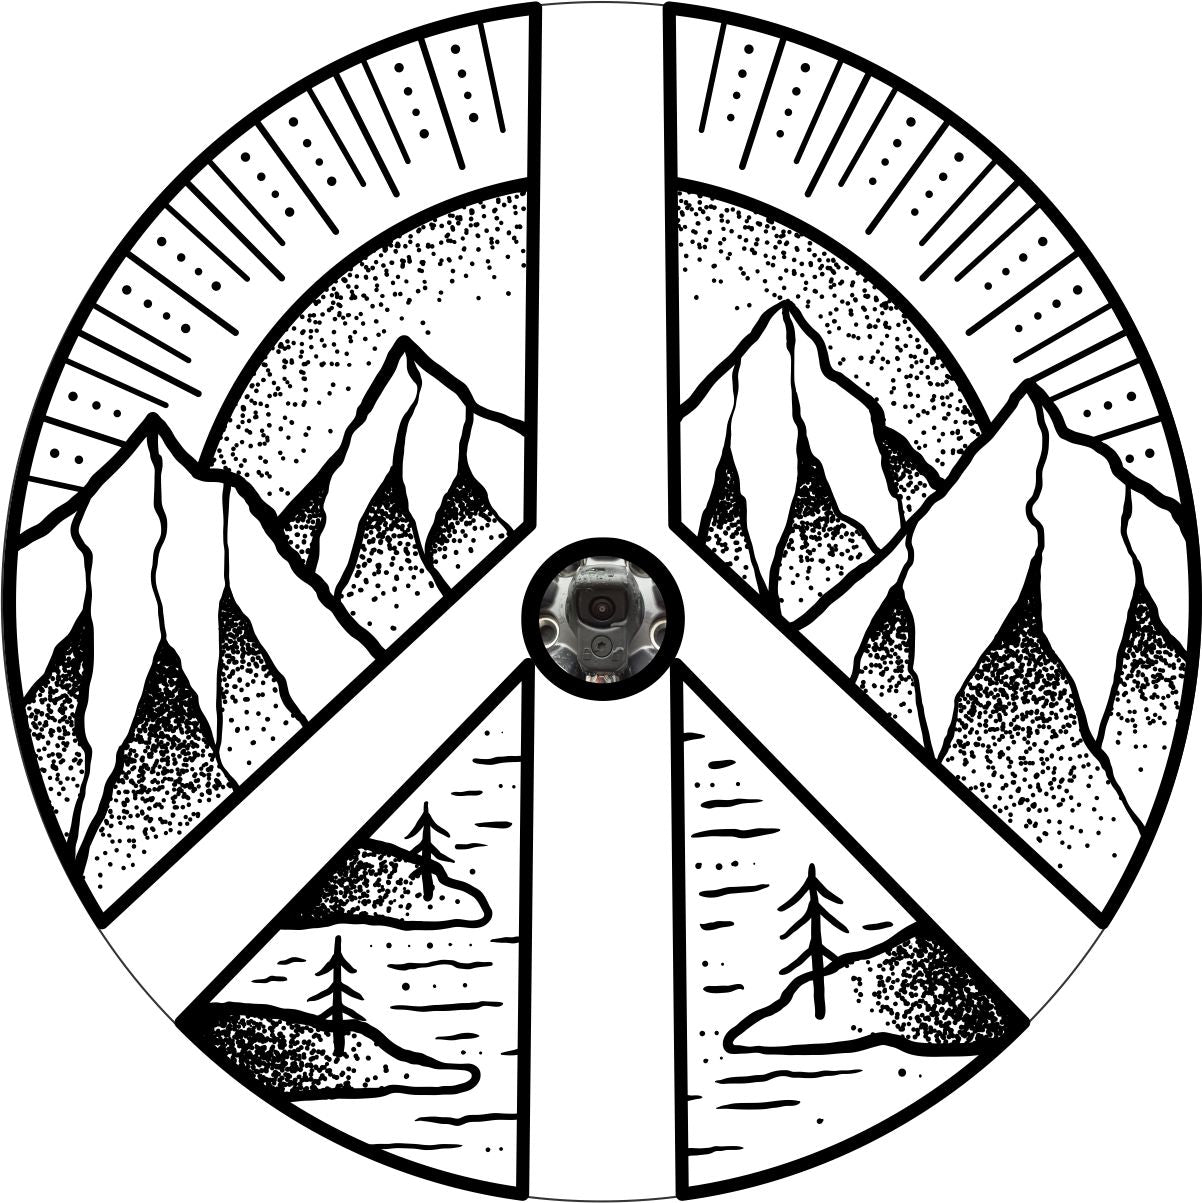 White vinyl spare tire cover with black shaded mountains covering seam to seam with a large peace sign going through the entire design to represent mountain peace. Design is made with a camera hole to accommodate a backup camera.